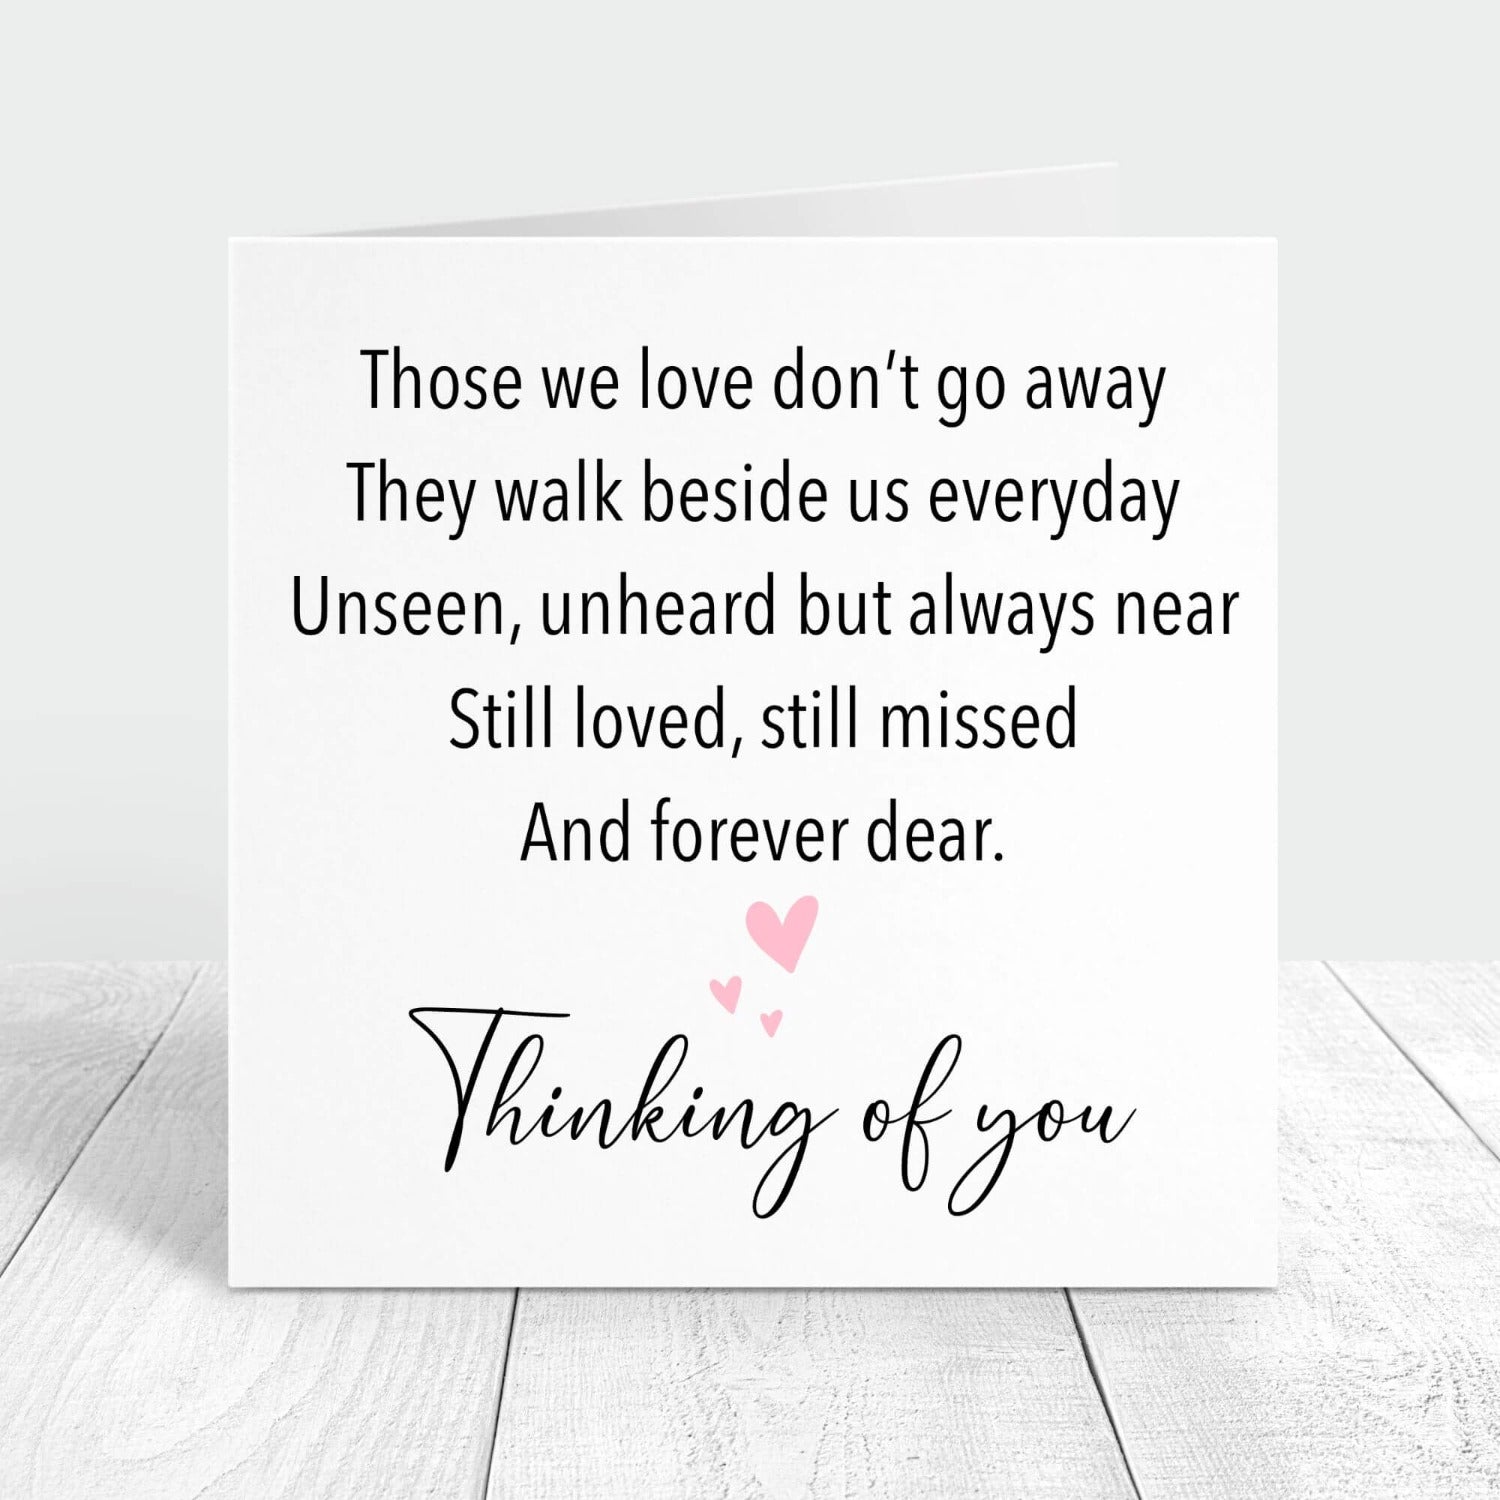 thinking of you card with poem